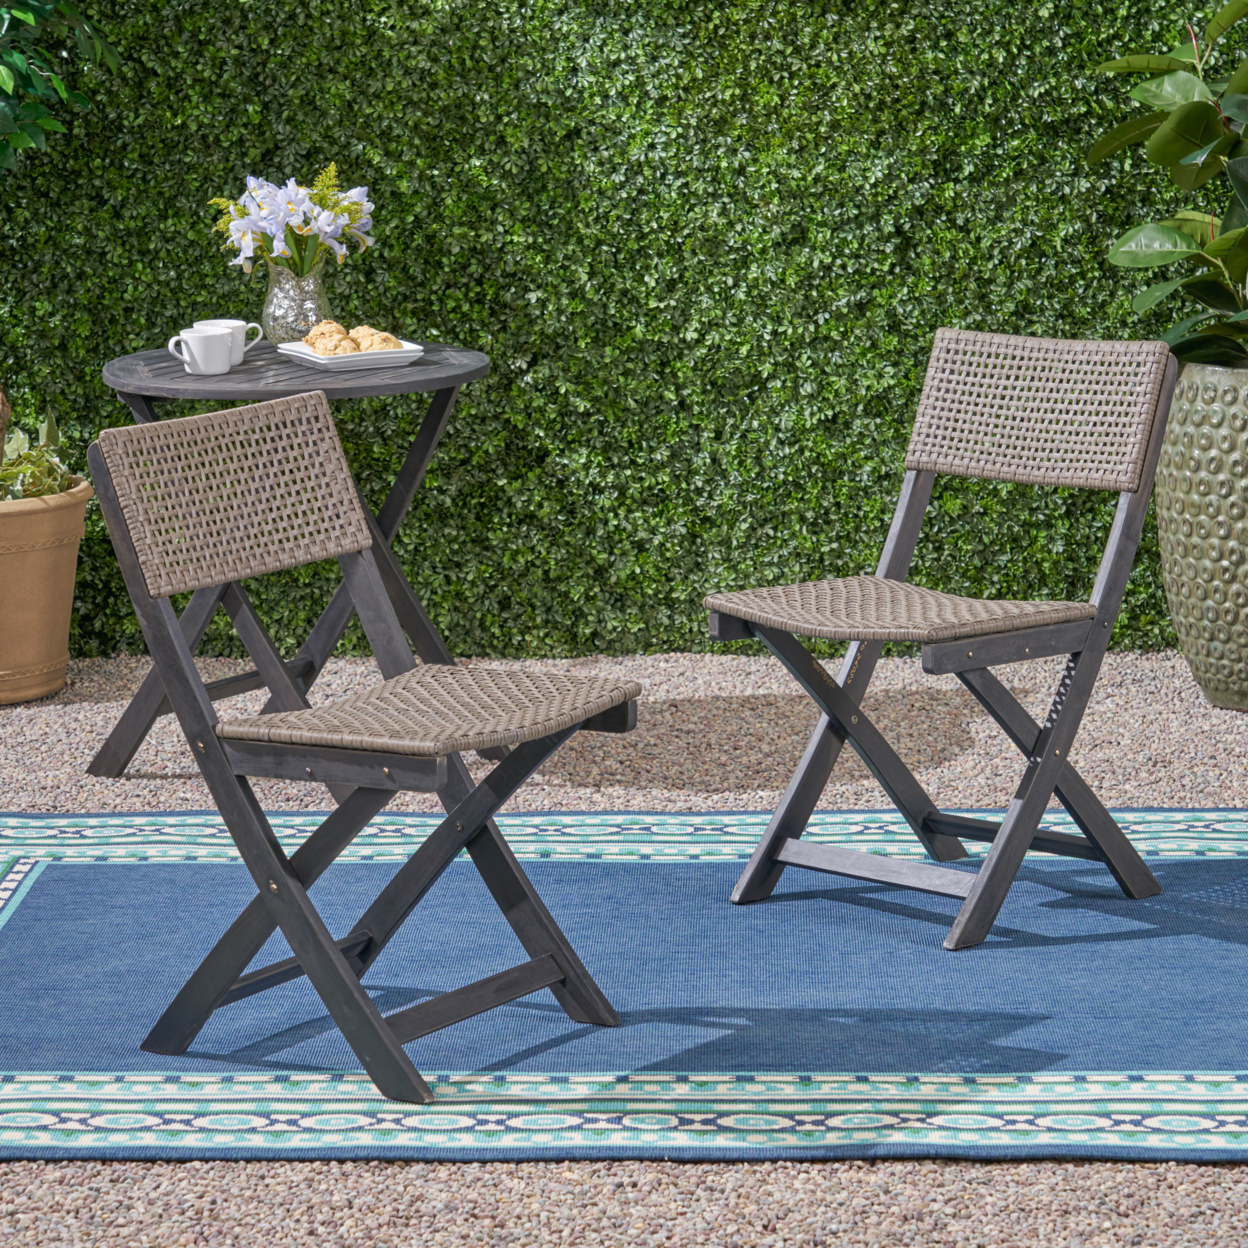 Ida Outdoor Acacia Wood Foldable Bistro Chairs With Wicker Seating (Set Of 2) - Dark Gray + Brown Wicker